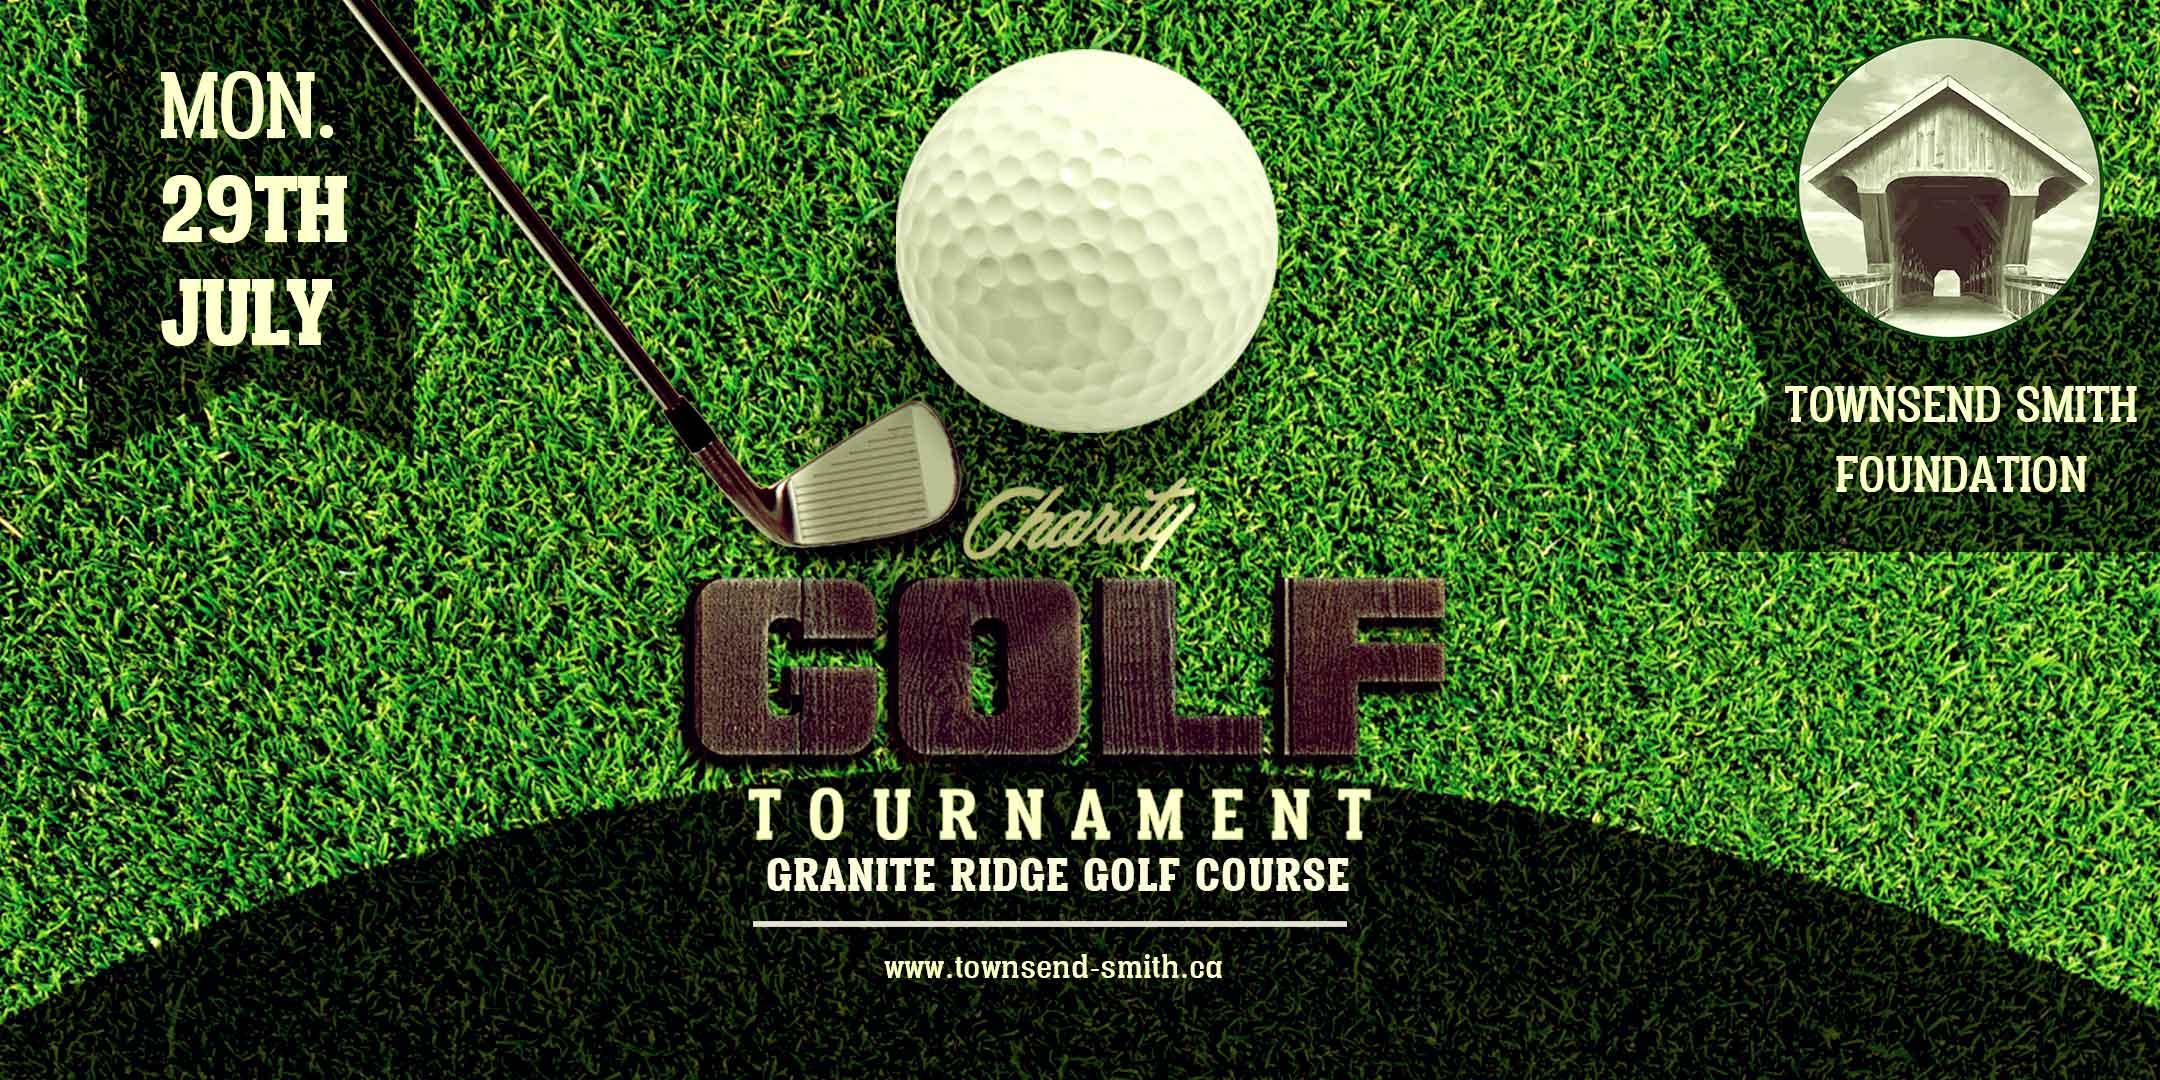 Townsend Smith Charity Golf Tournament